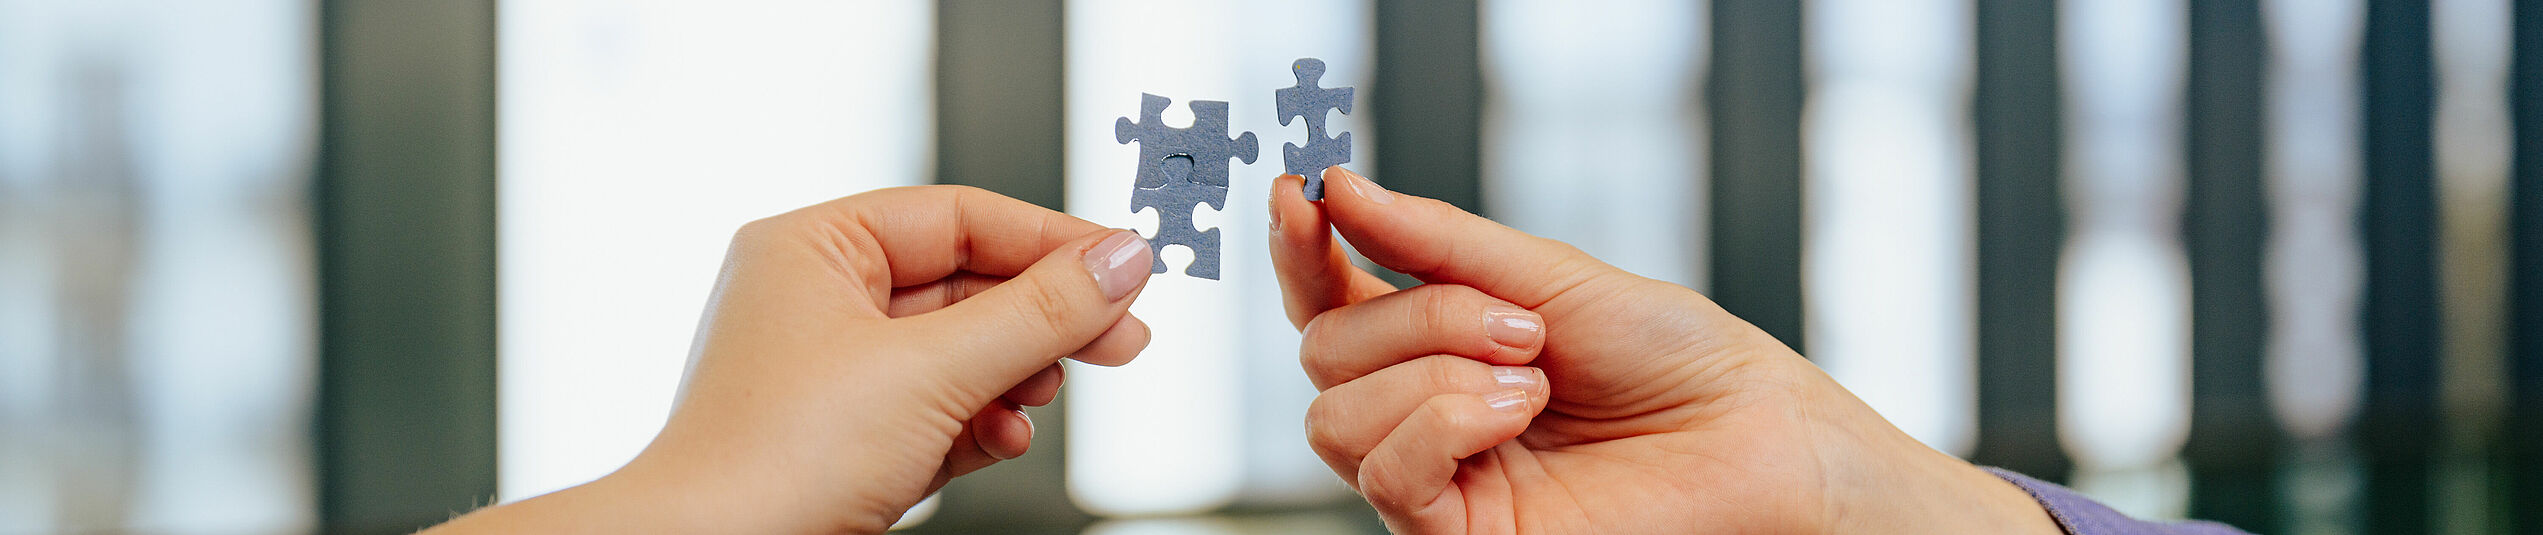 A left hand holds two interlocked gray puzzle pieces, a right hand holds a single gray puzzle piece.